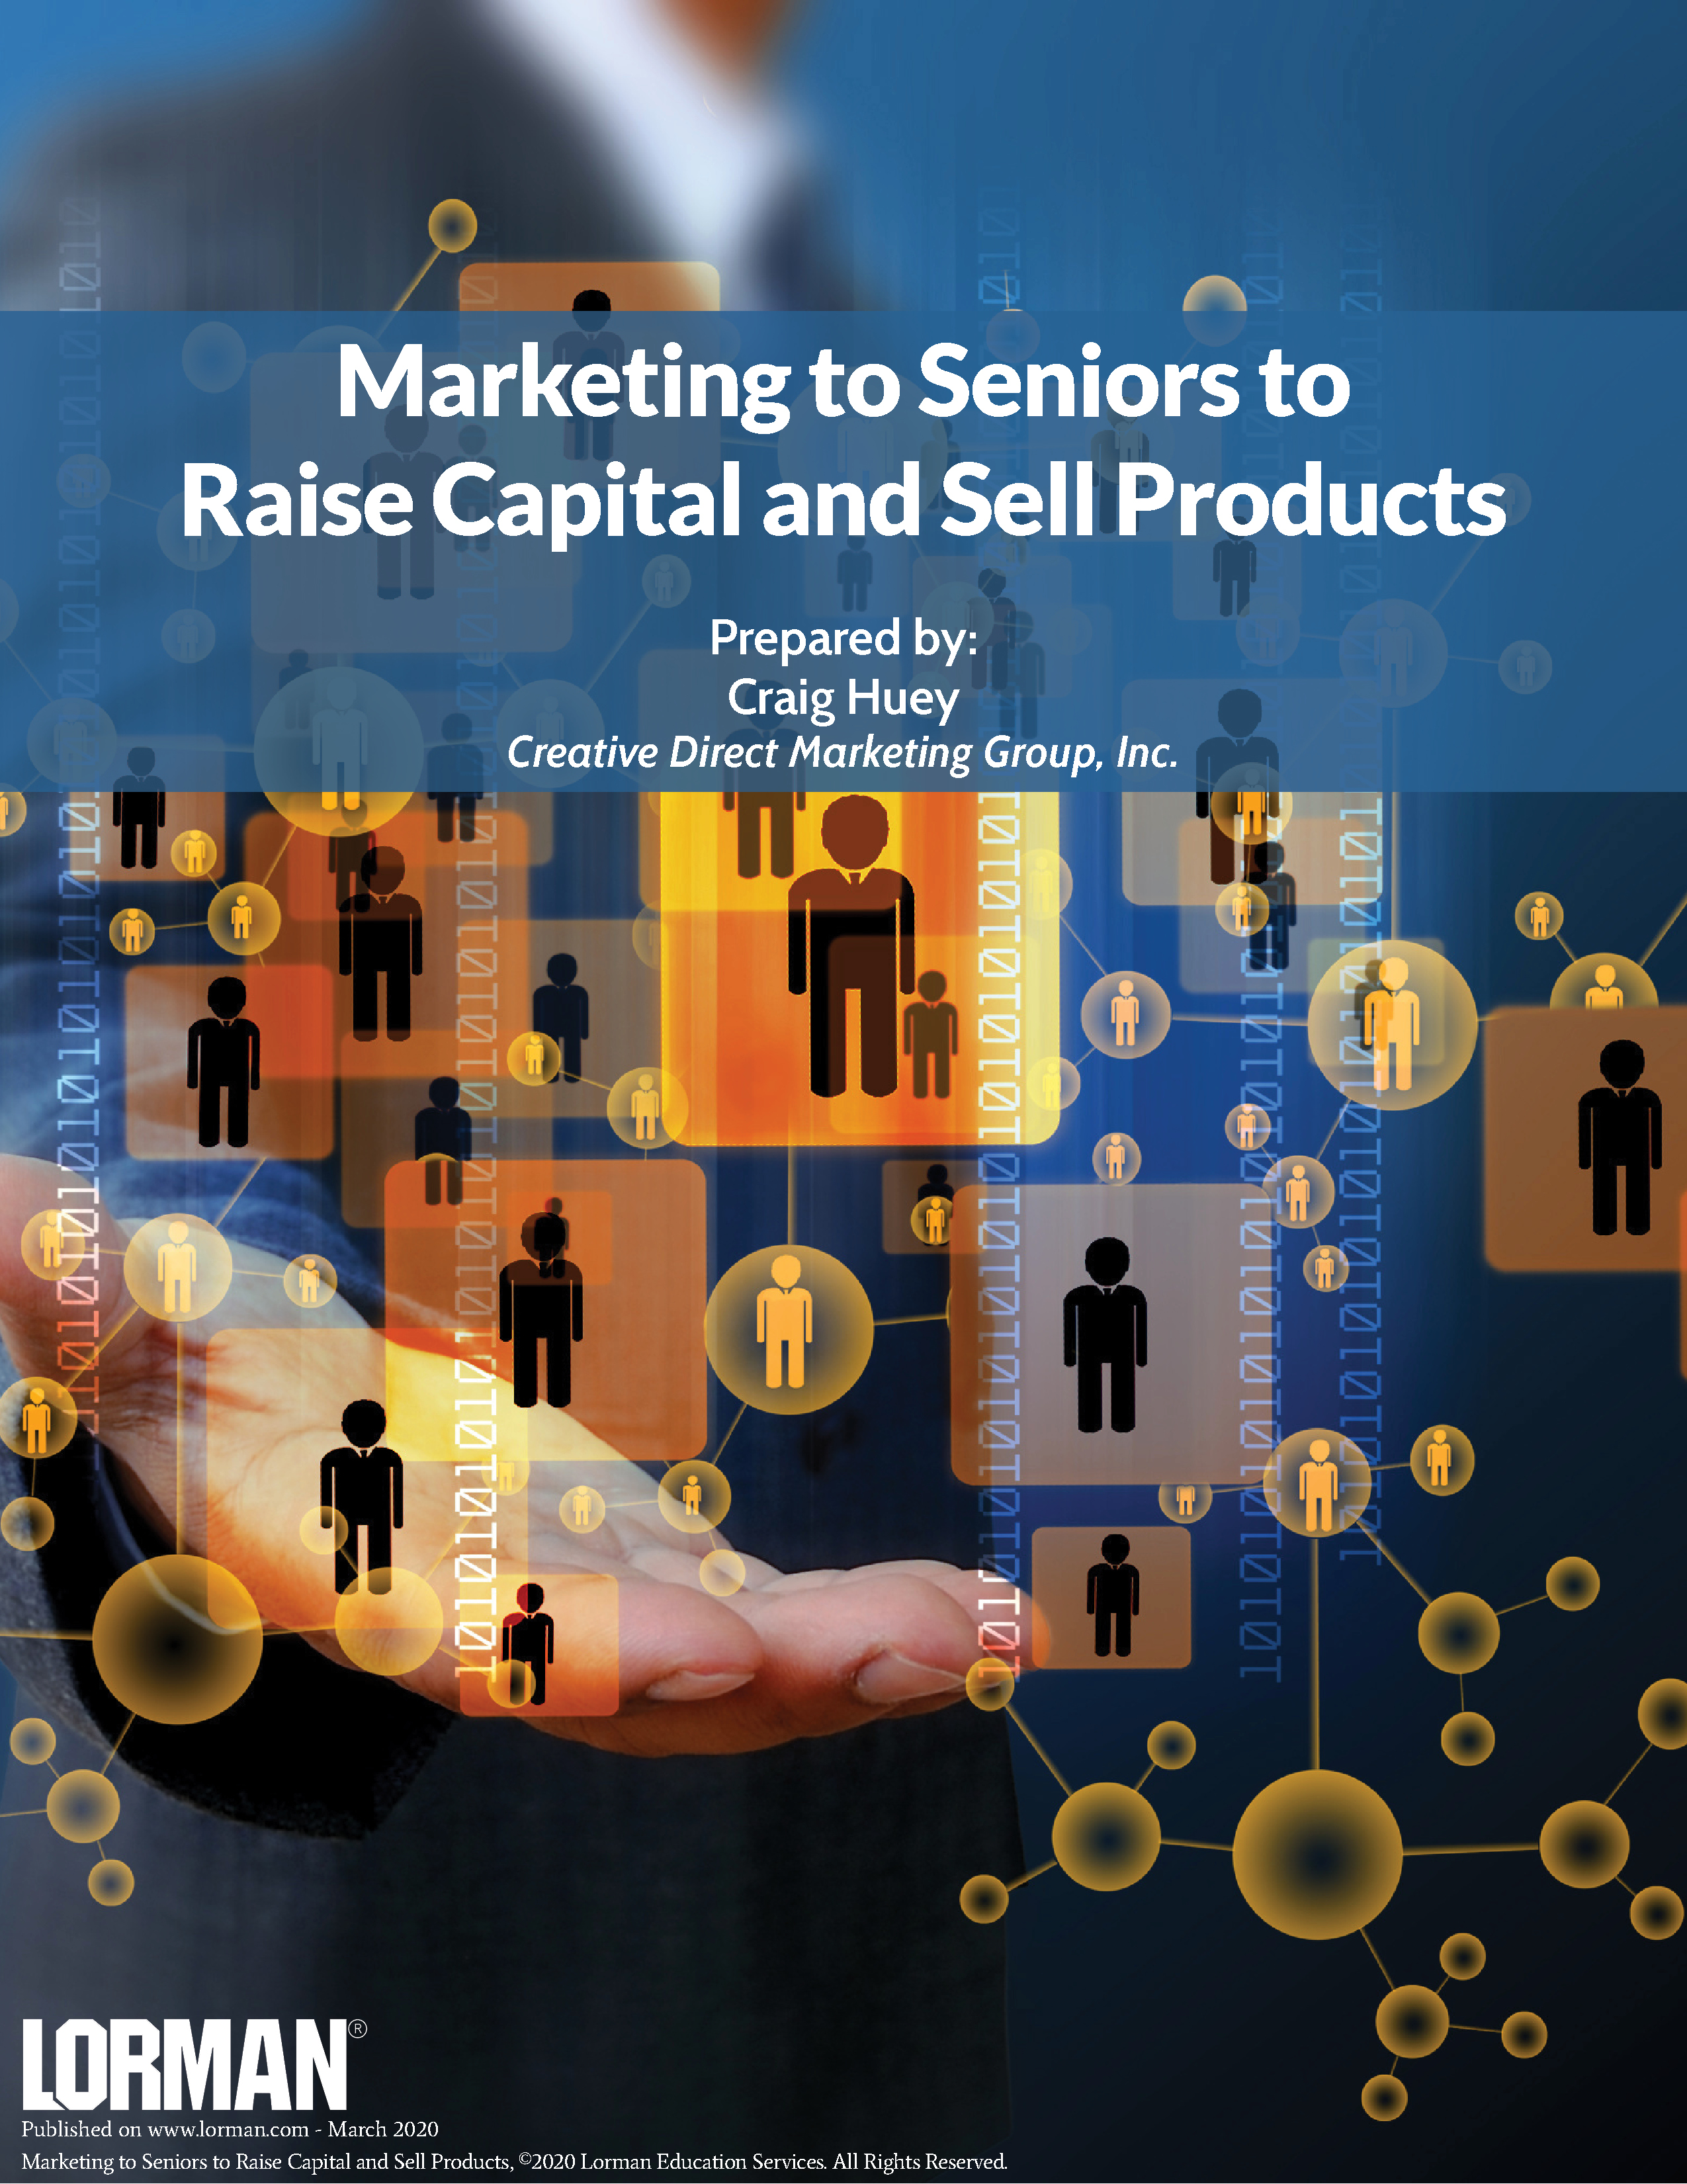 Marketing to Seniors to Raise Capital and Sell Products